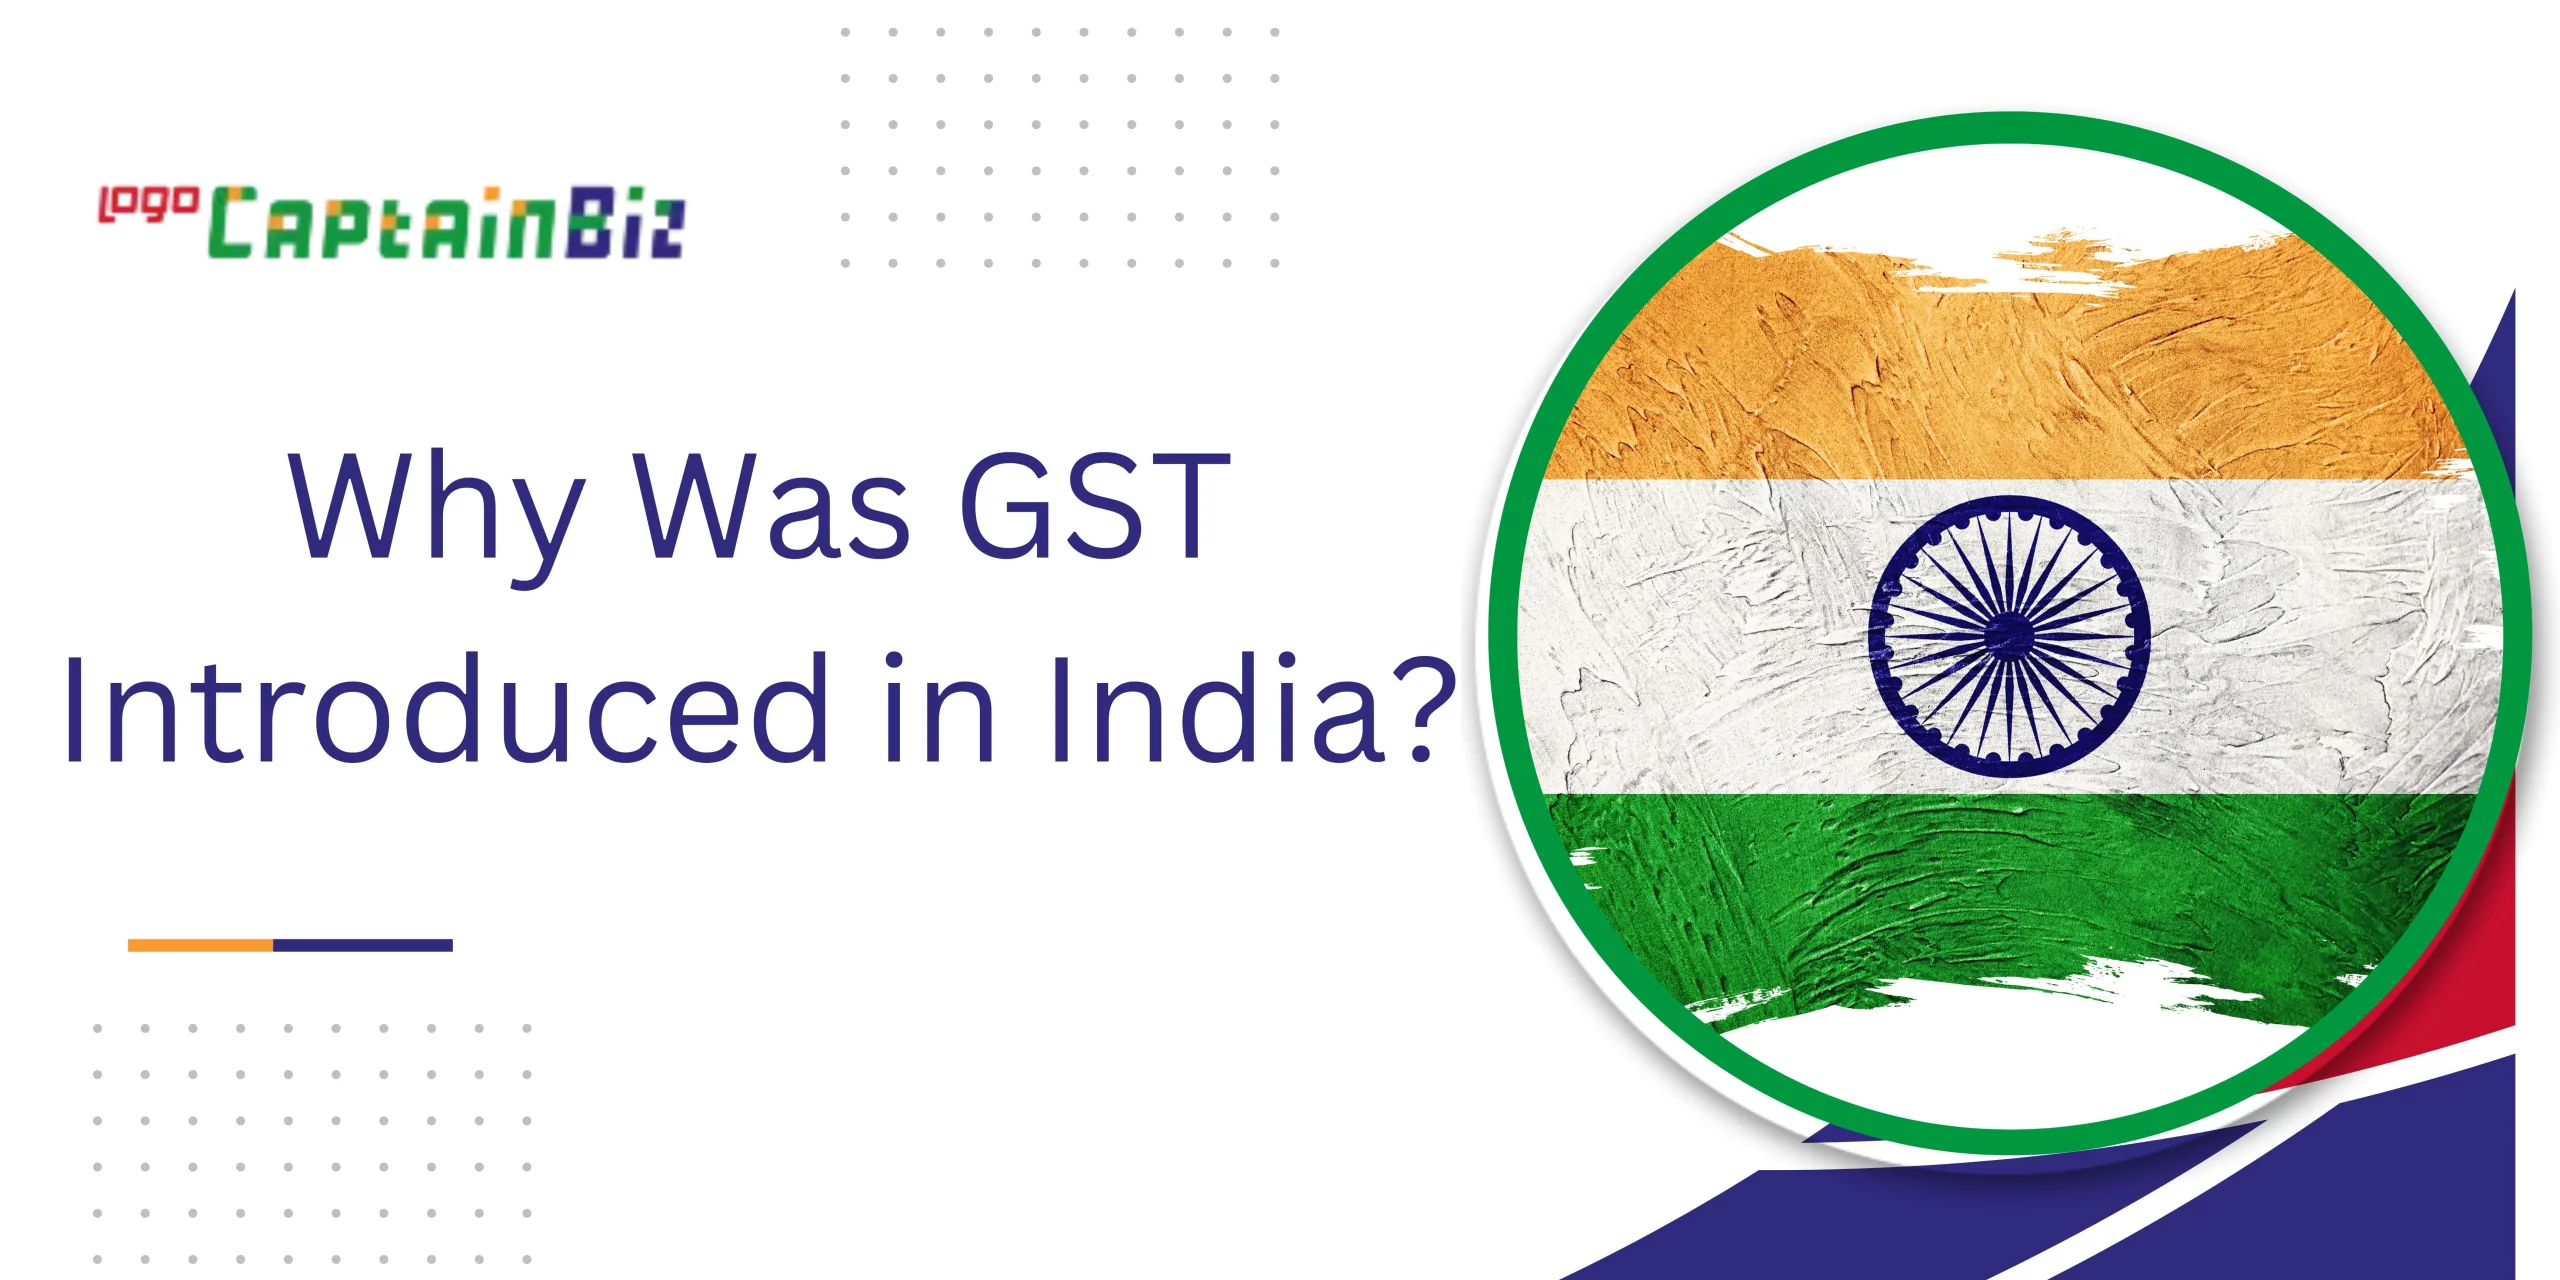 CaptainBiz: Why Was GST Introduced in India?